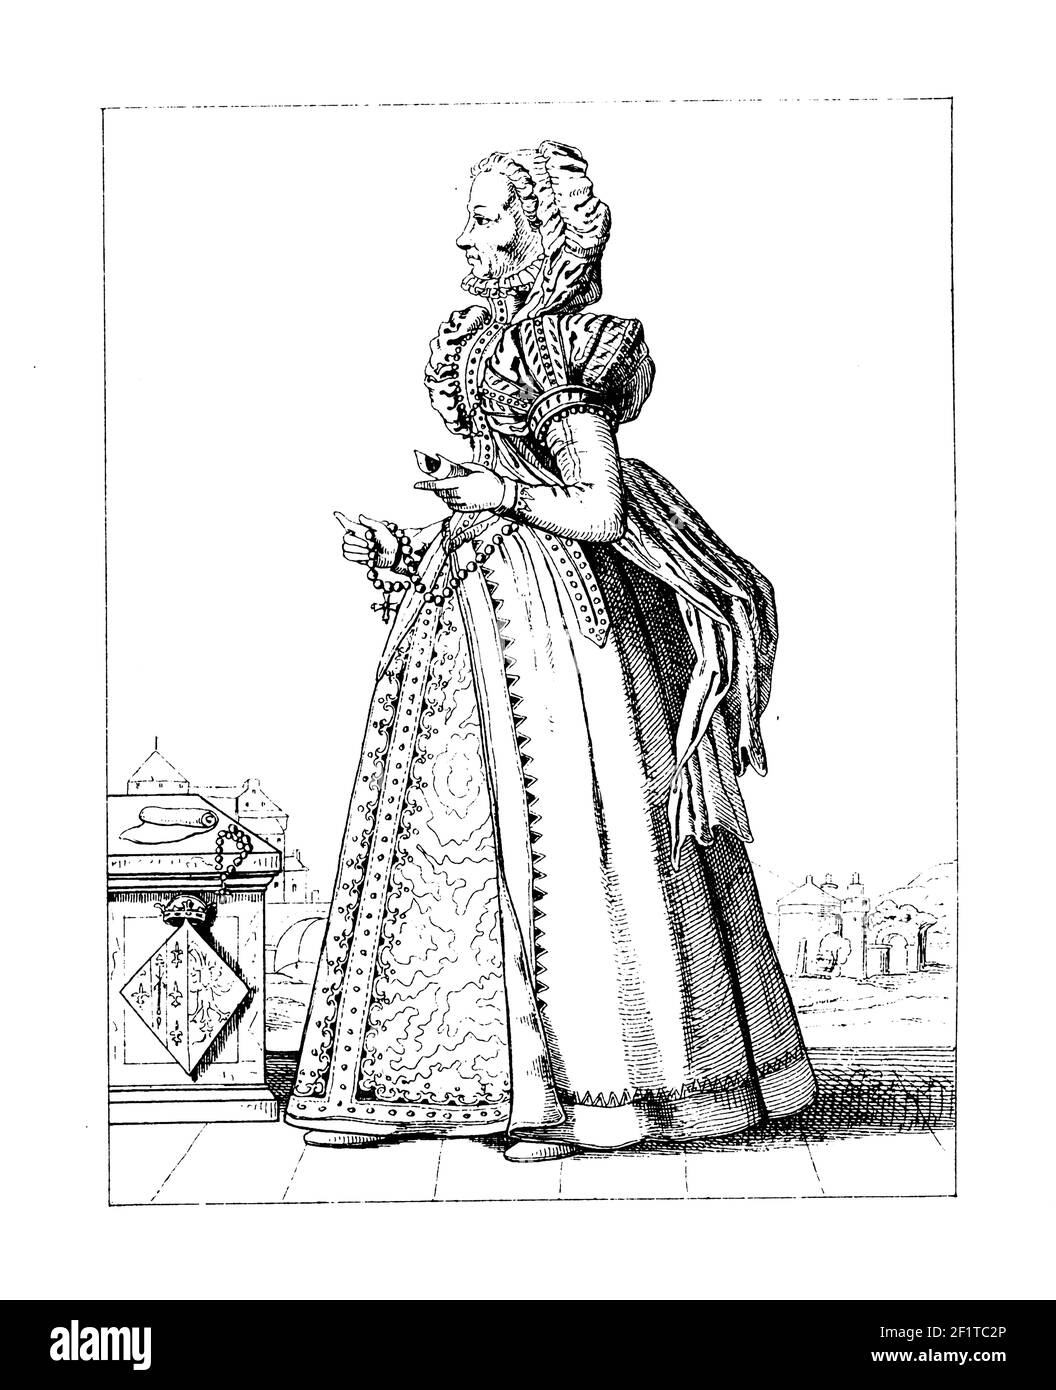 Vintage engraving of a portrait of Margaret, Duchess of Parma and governor of the Netherlands. She was born on December 28, 1522 in Oudenaarde, Belgiu Stock Photo